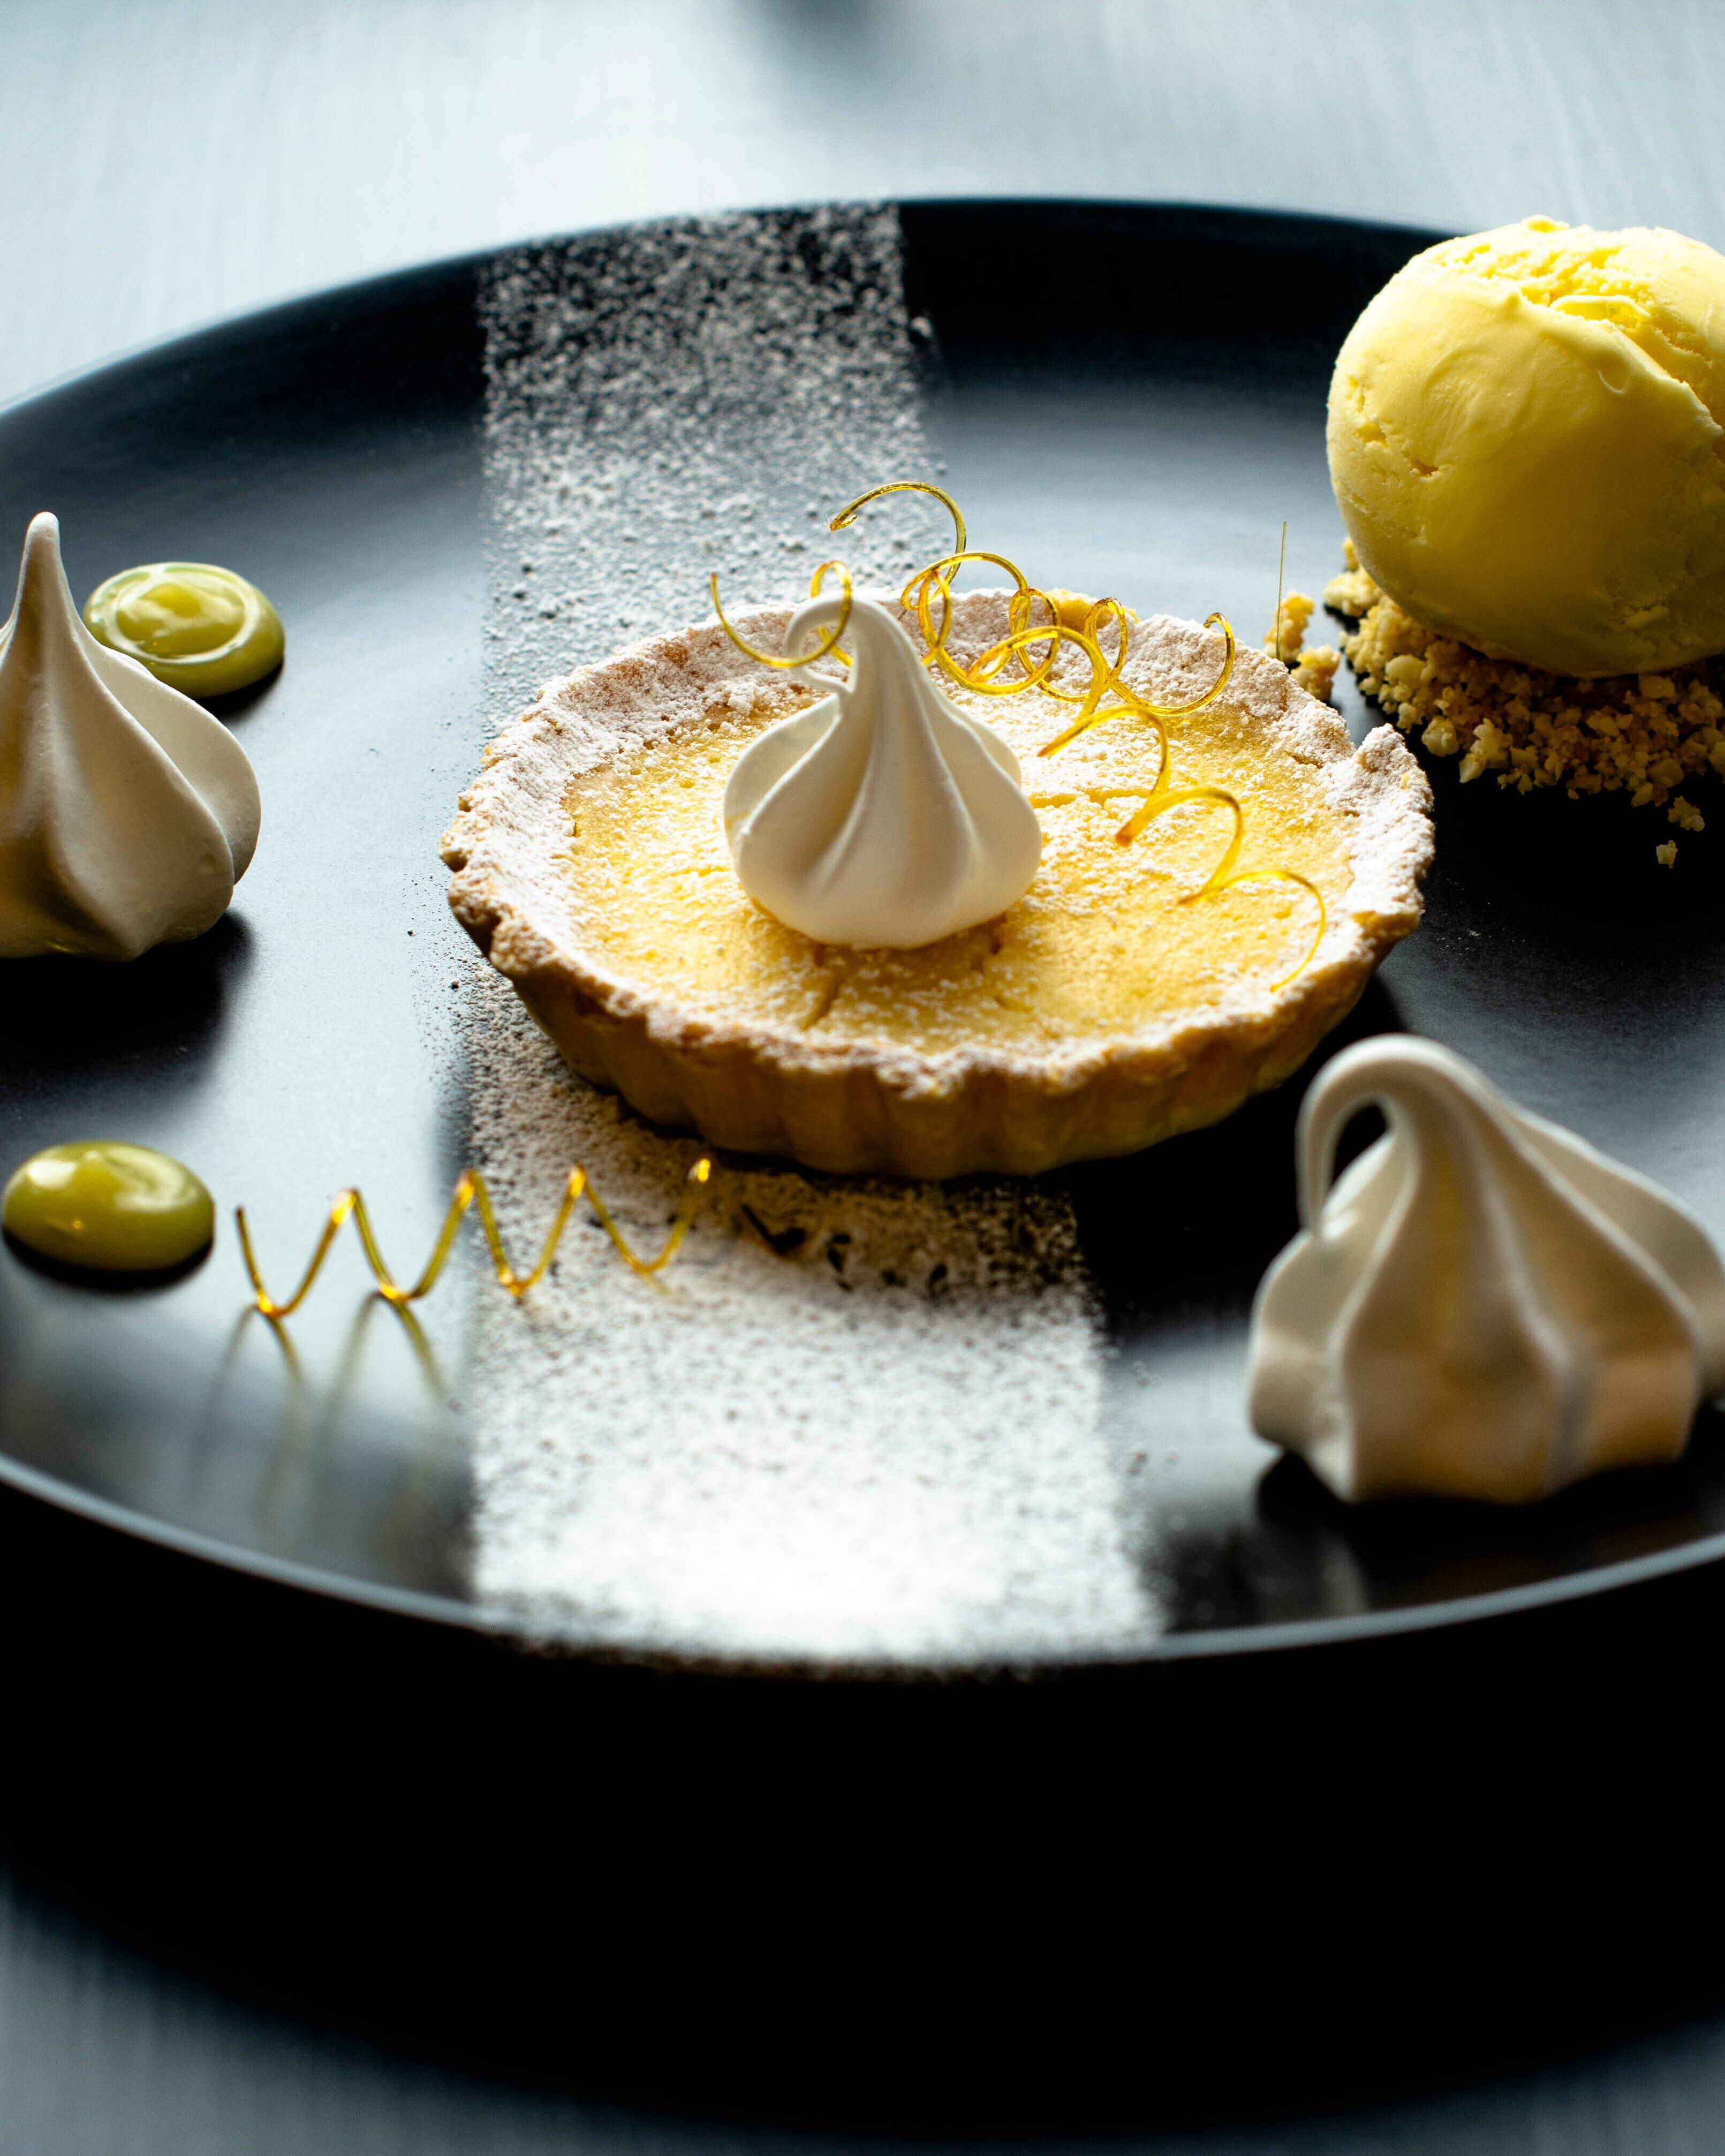 lemon tart with mini meringues and sugar spirals with a limoncello ice cream on the side, on a black plate and dark background with the light catching from the back